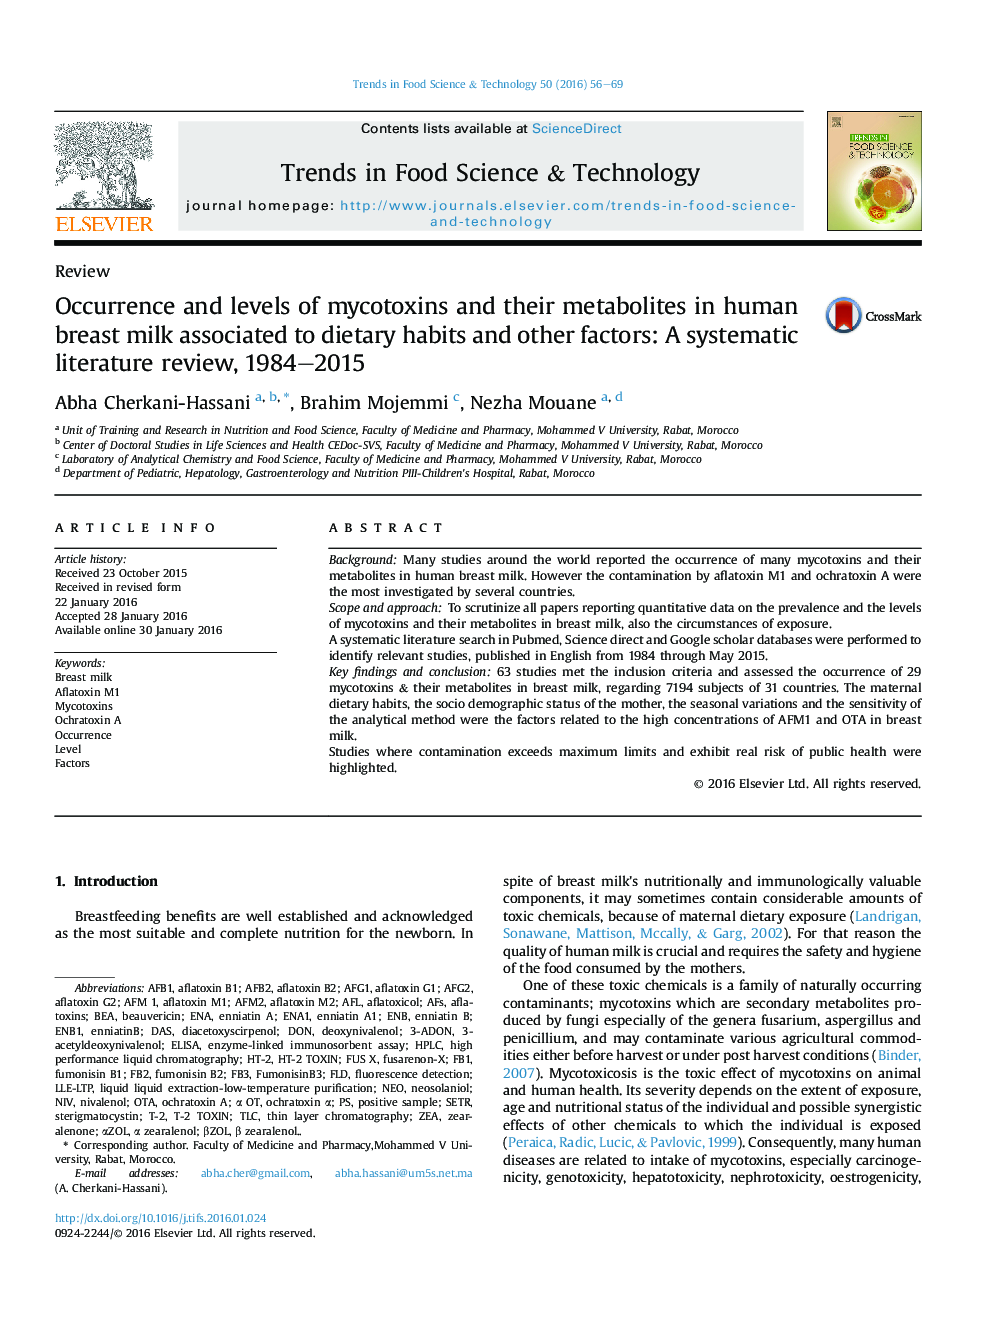 Occurrence and levels of mycotoxins and their metabolites in human breast milk associated to dietary habits and other factors: A systematic literature review, 1984–2015